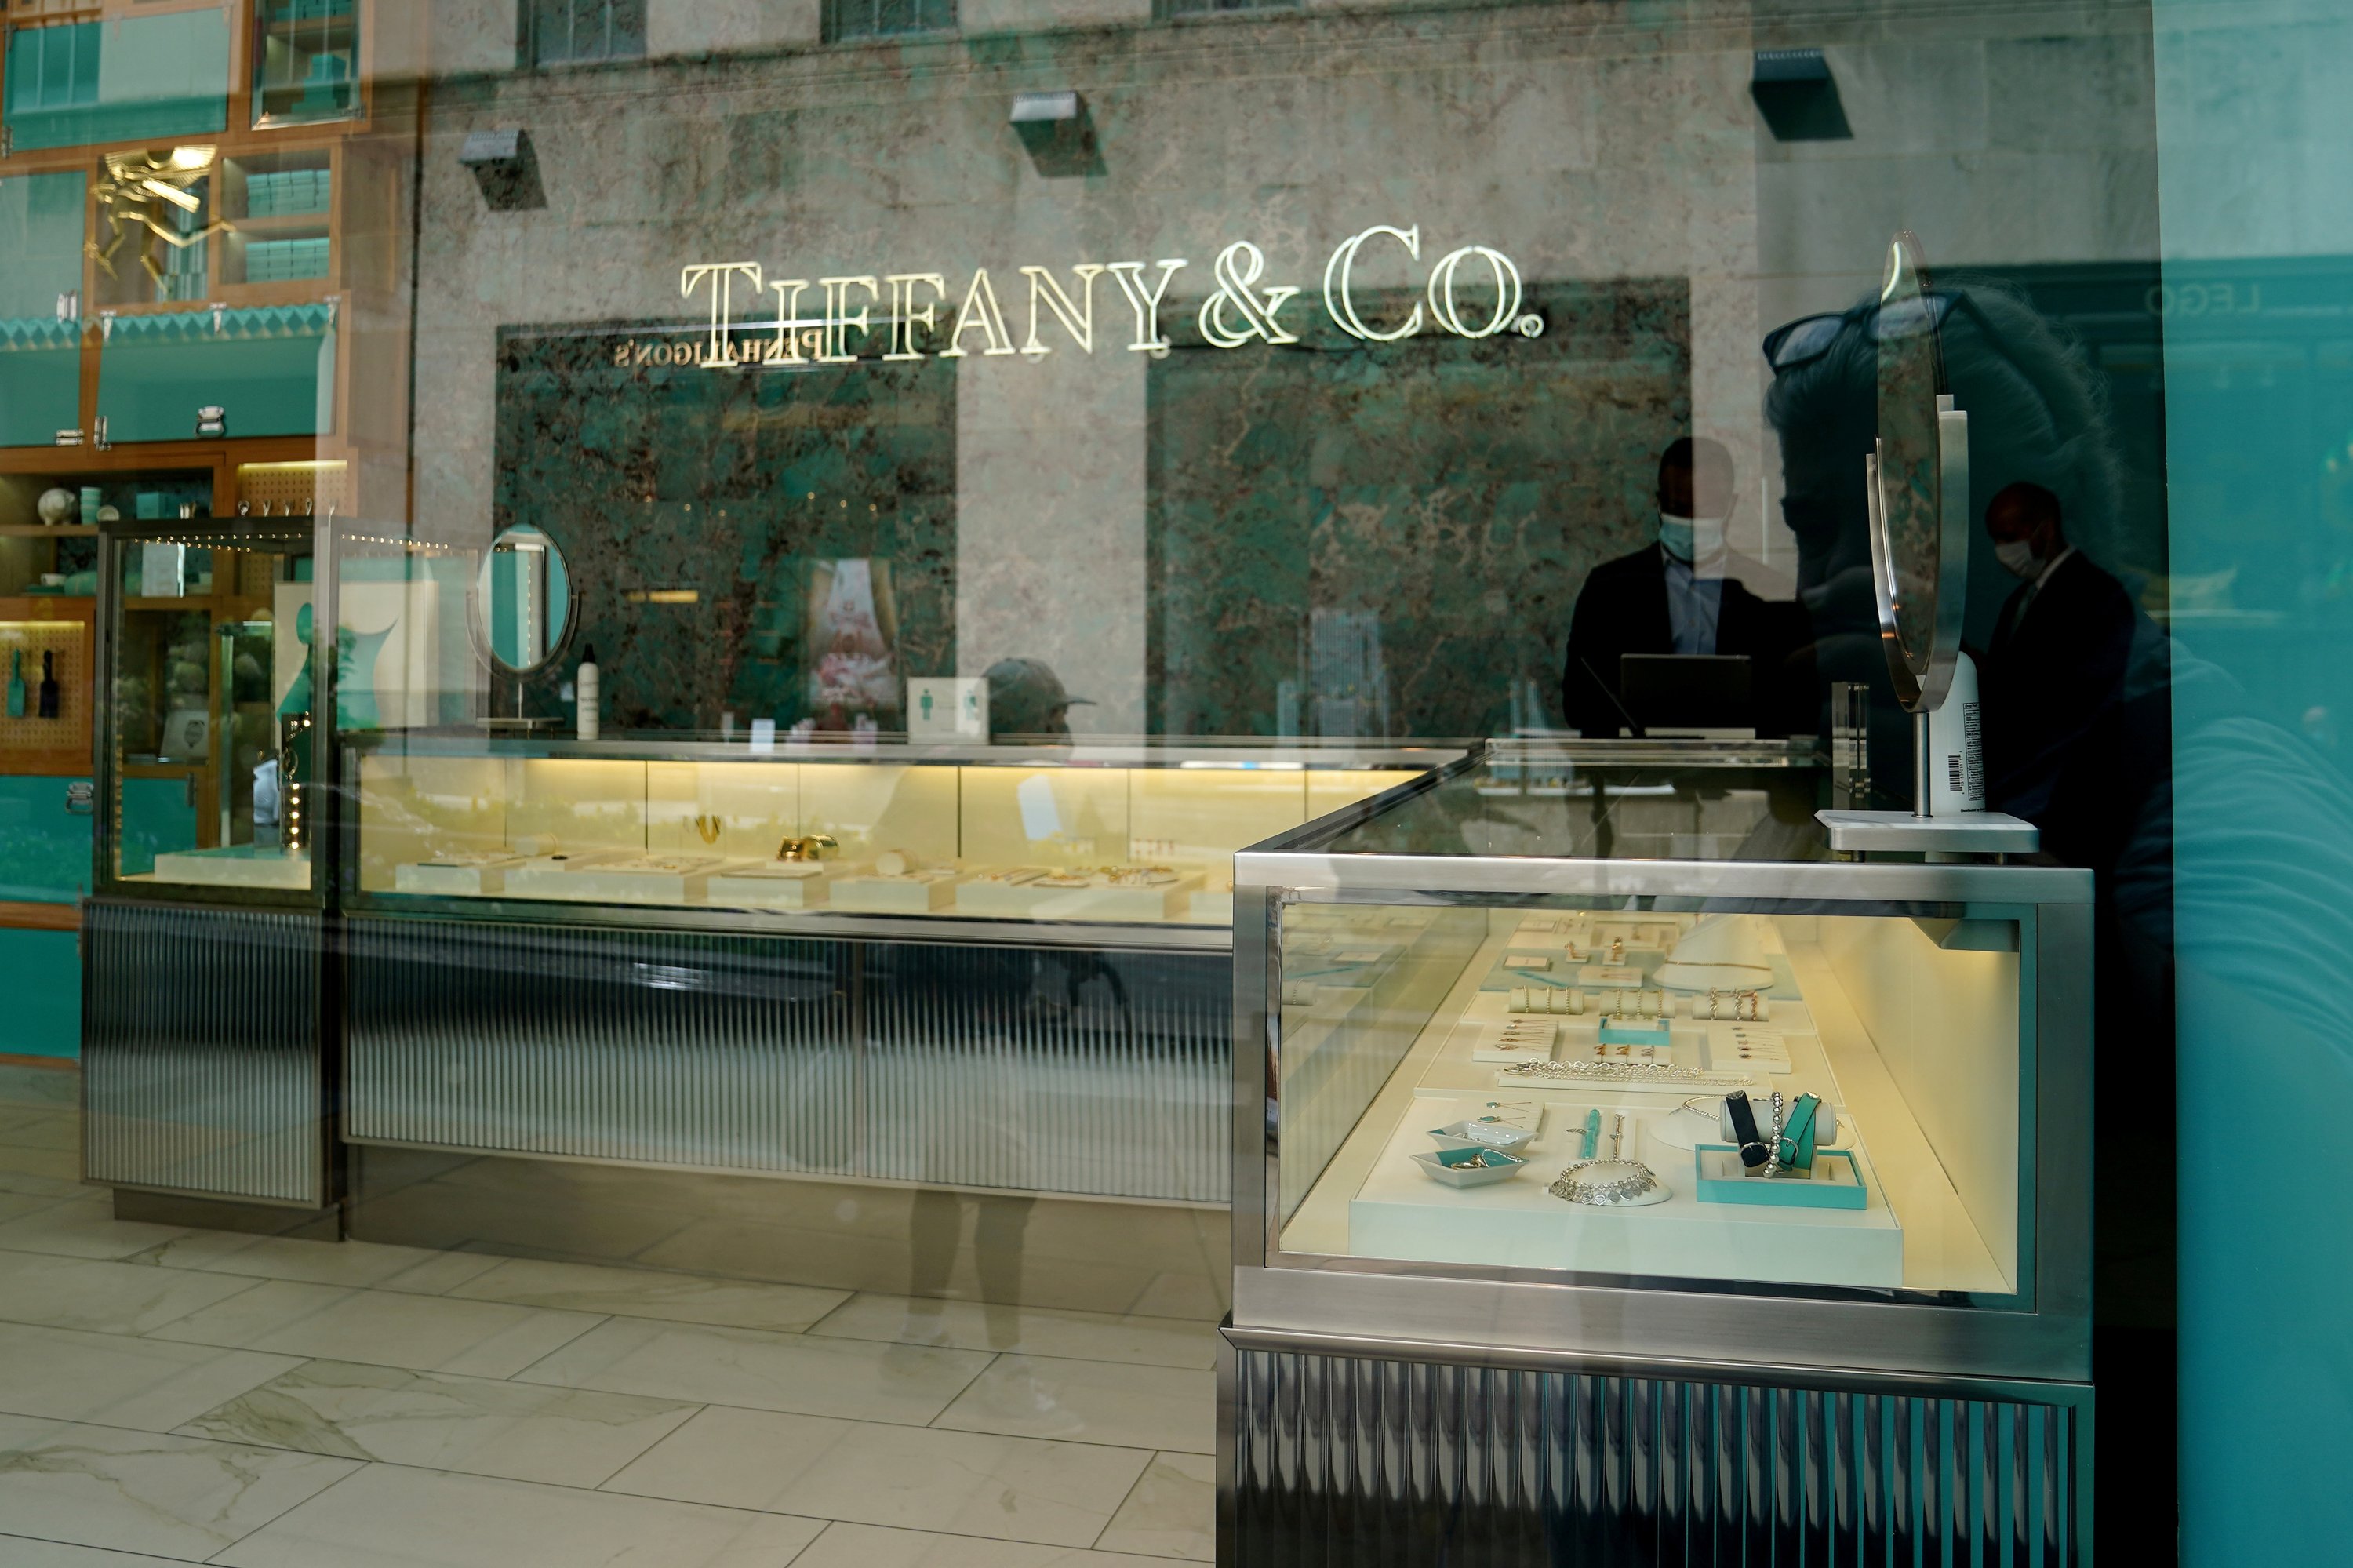 French LVMH, US jeweler Tiffany agree to merger at lower price